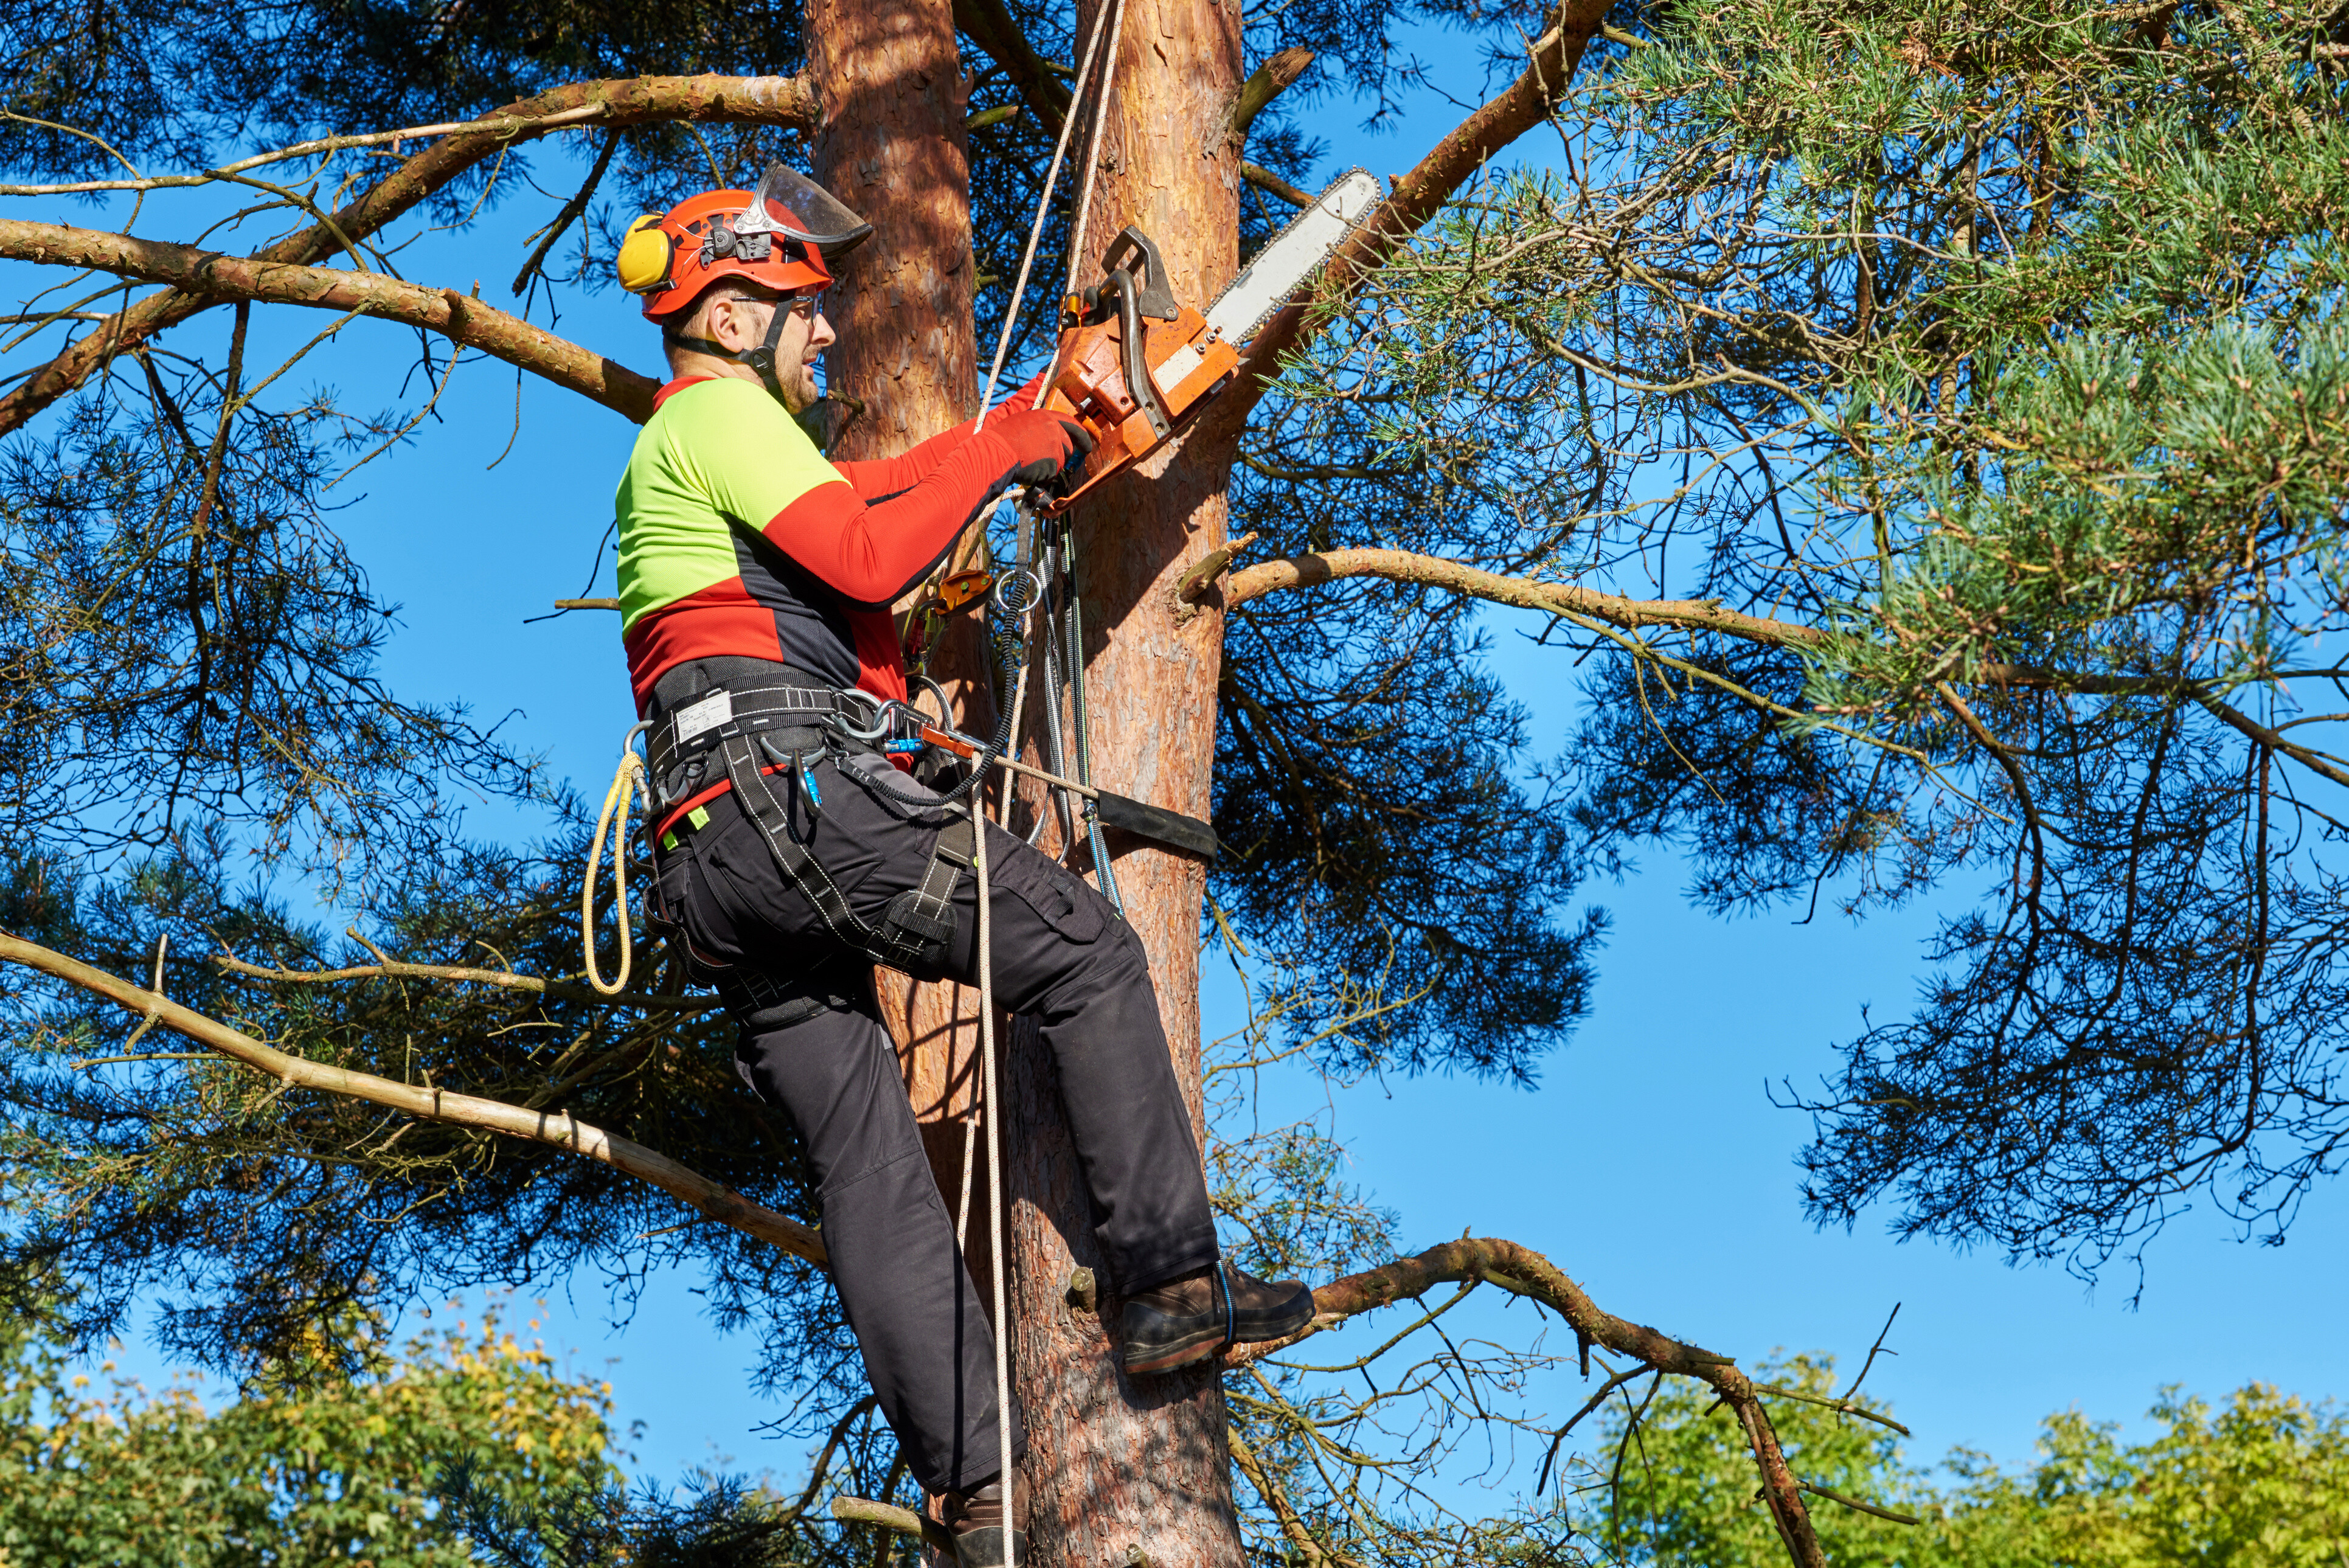 A professional tree surgeon wearing safety gear and strapped to a harness while he cuts off a tree branch.